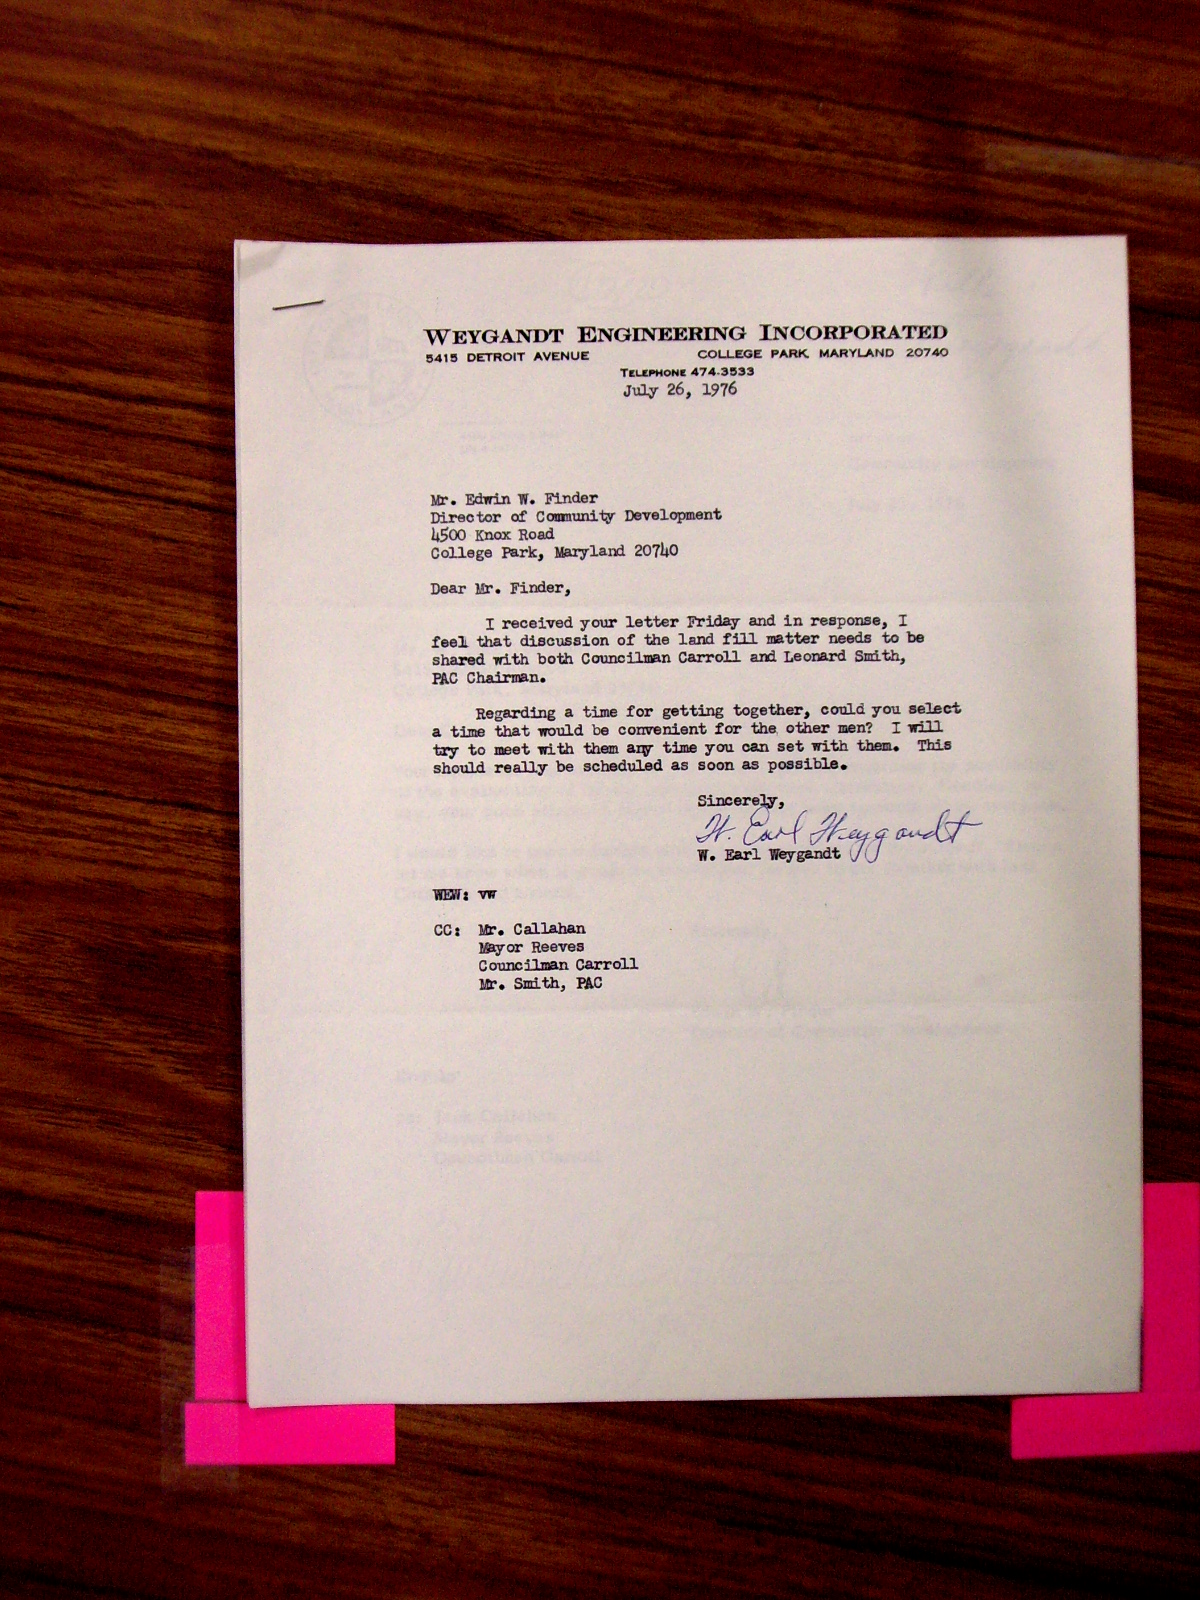 Letter from W. Earl Weygandt to Edwin Finder, City Director of Community Development